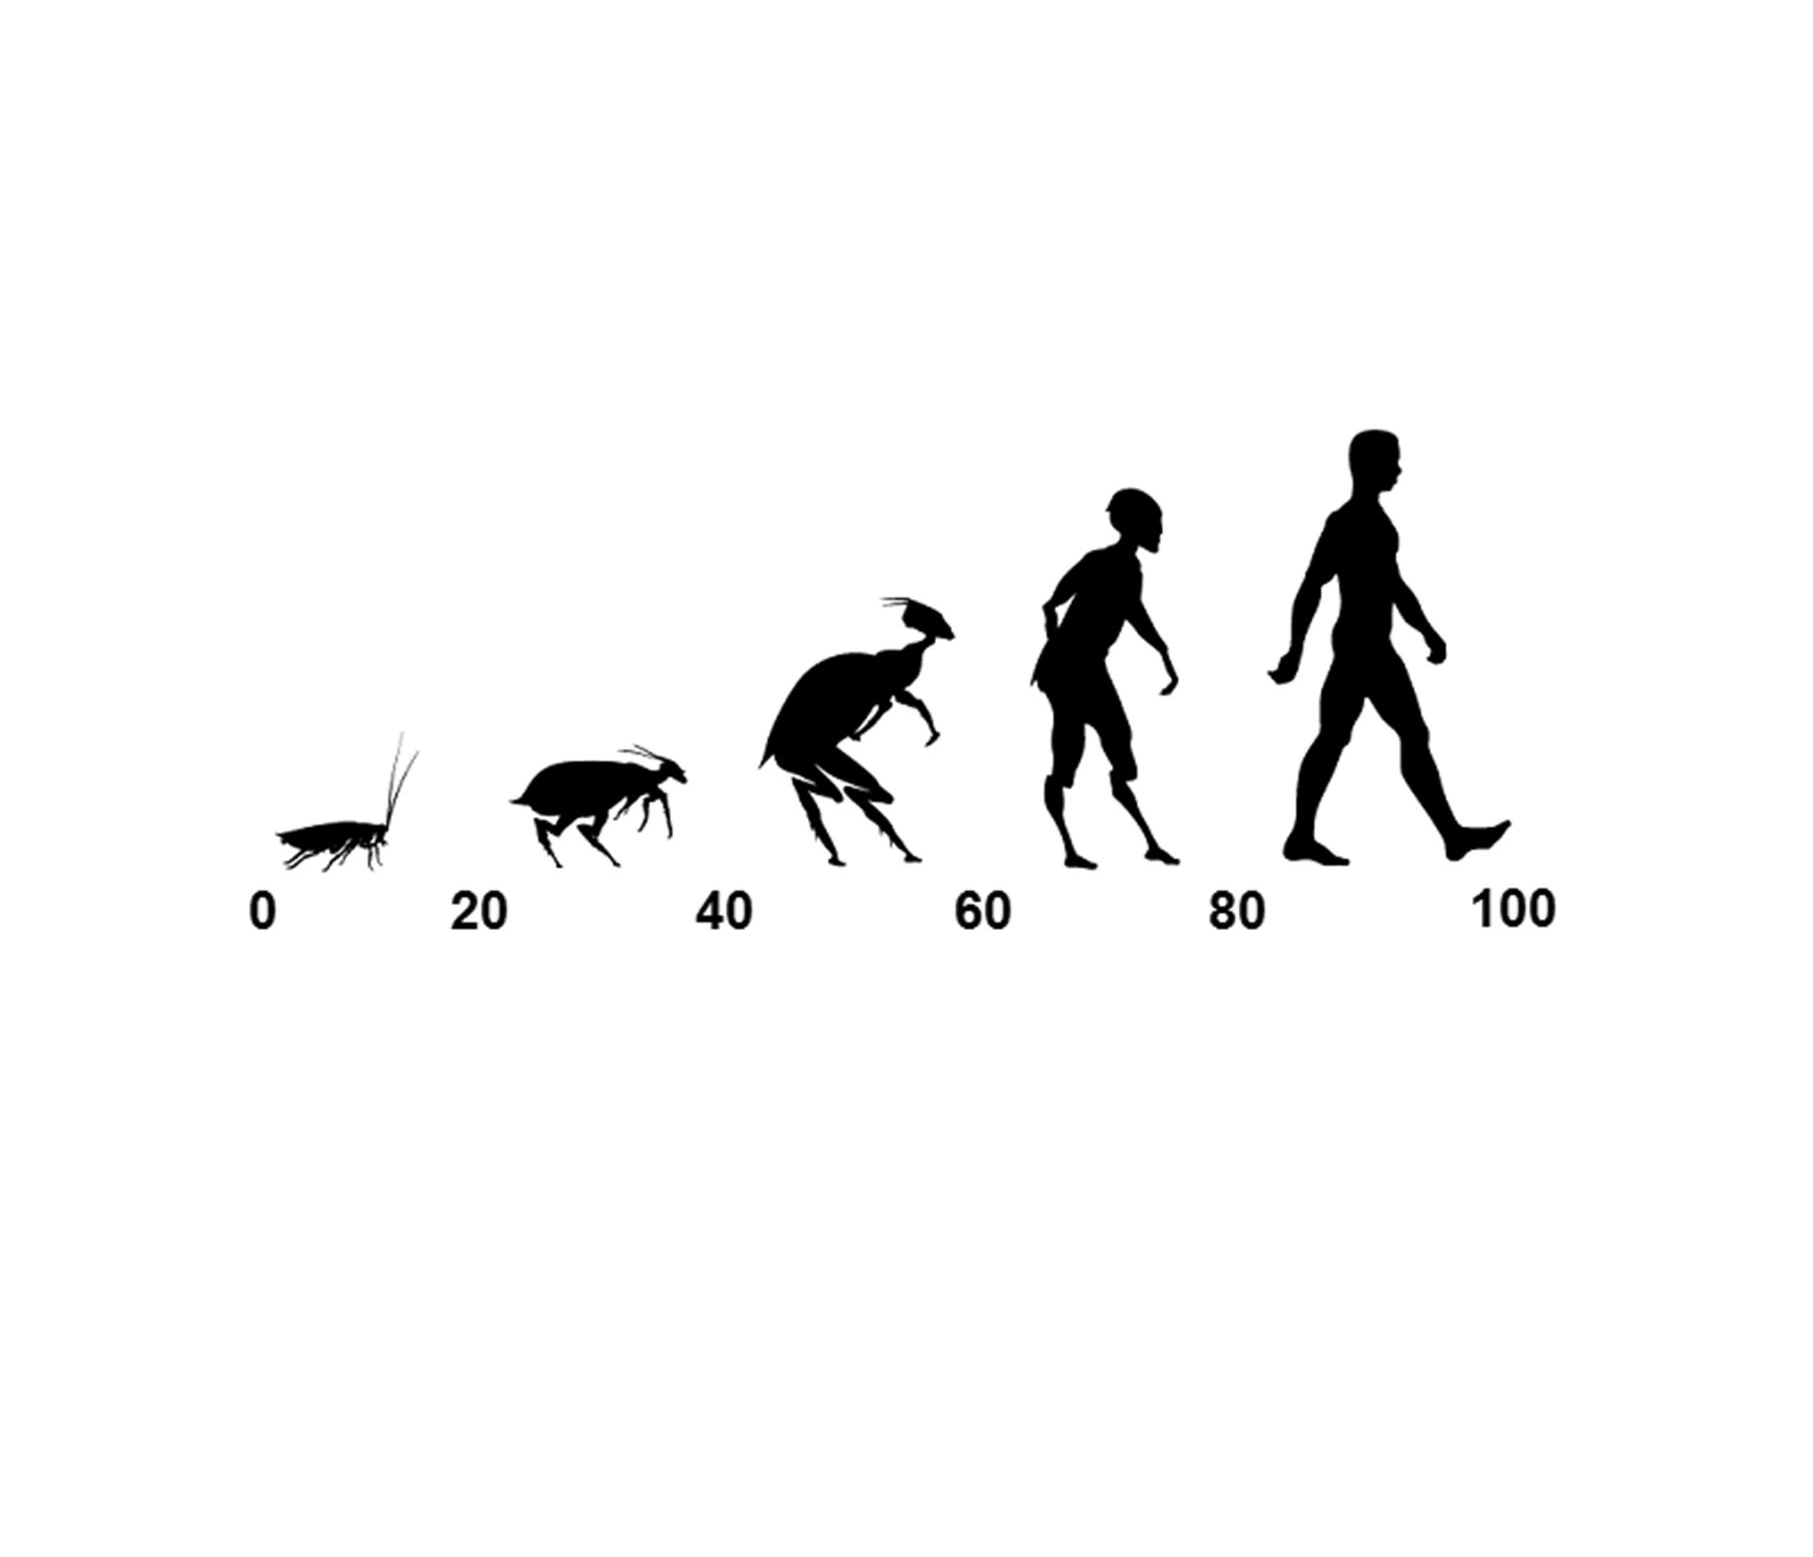 Cockroach to cyclists scale.